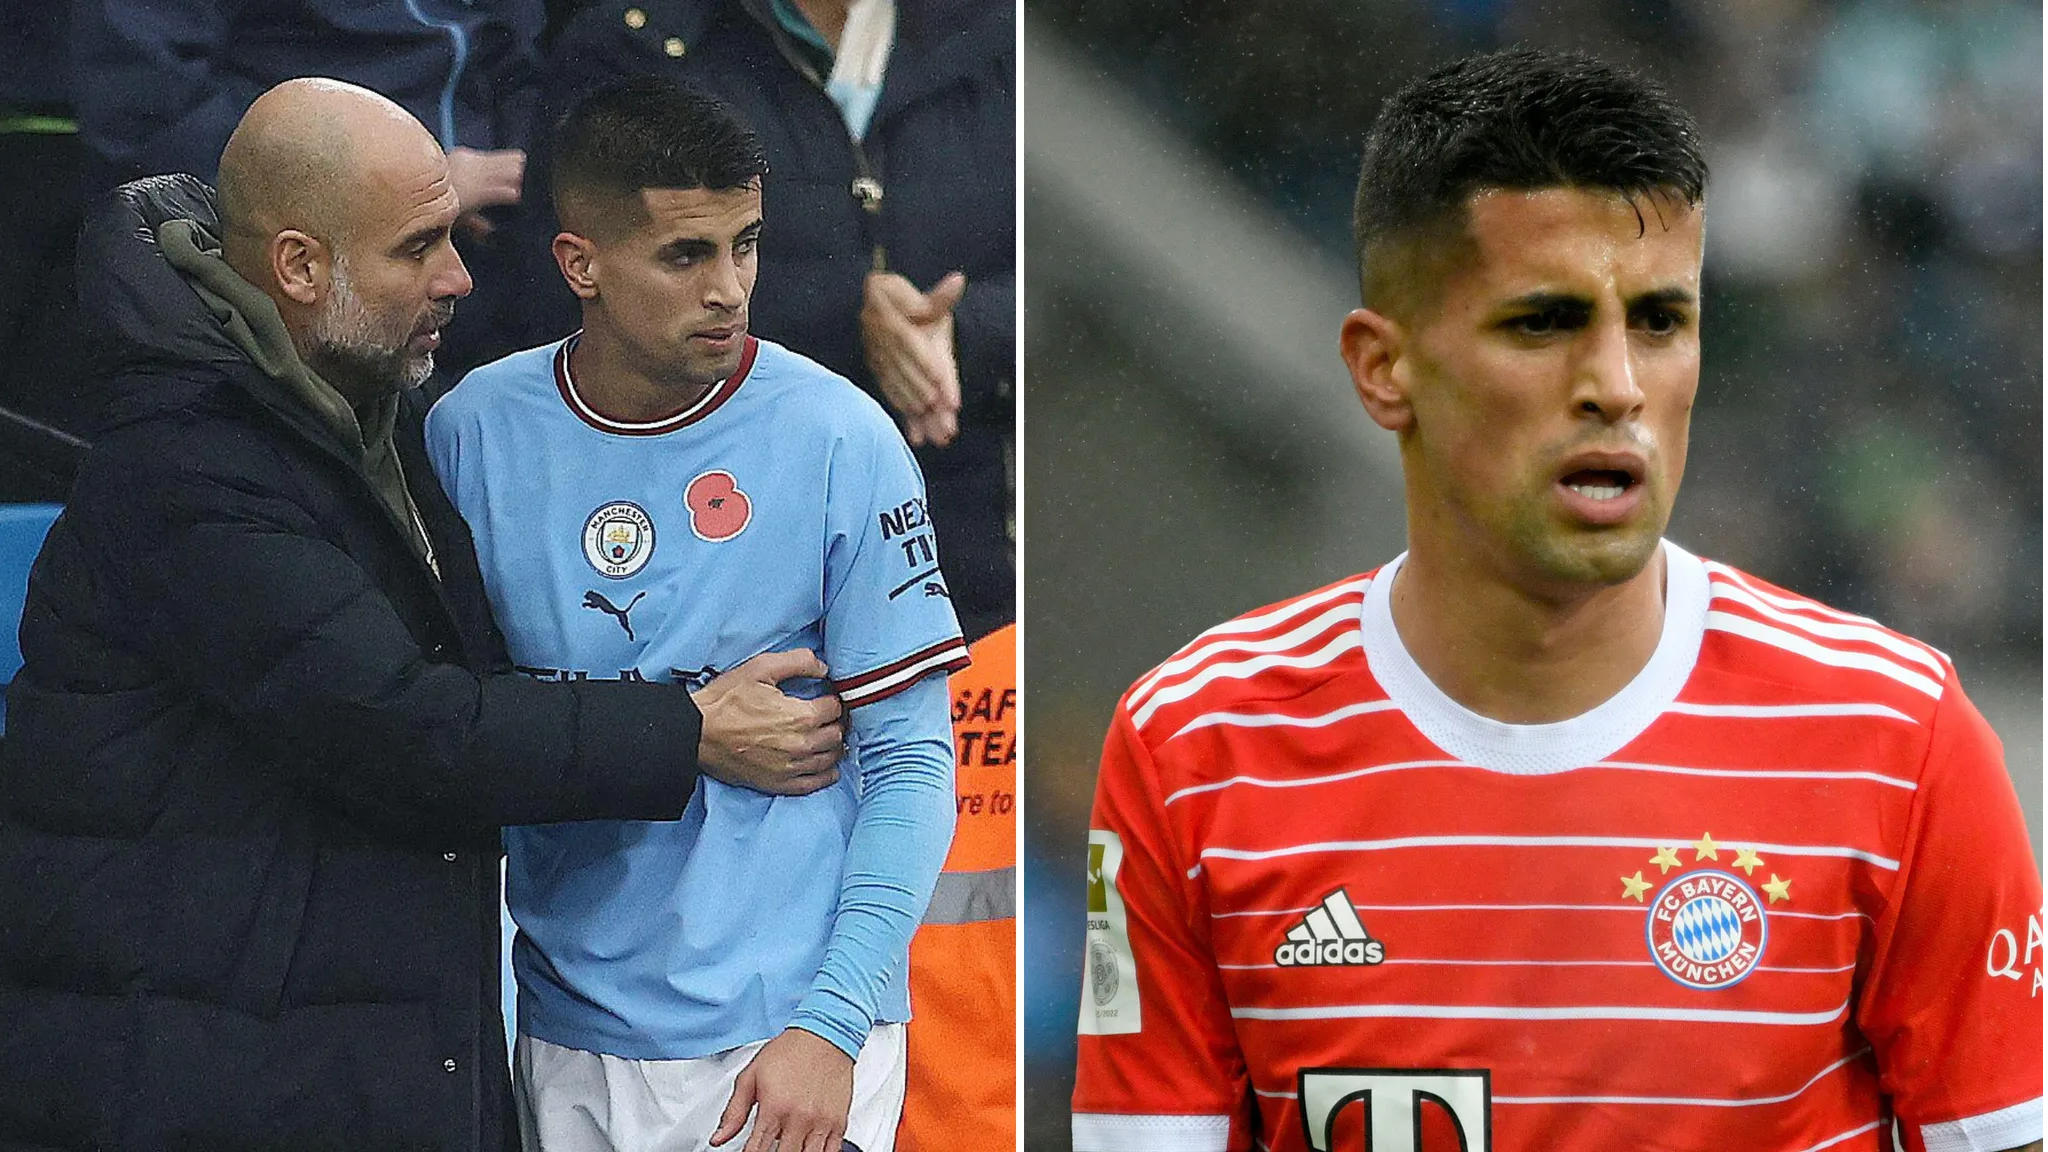 Footage of bizarre Joao Cancelo interview after winning goal for